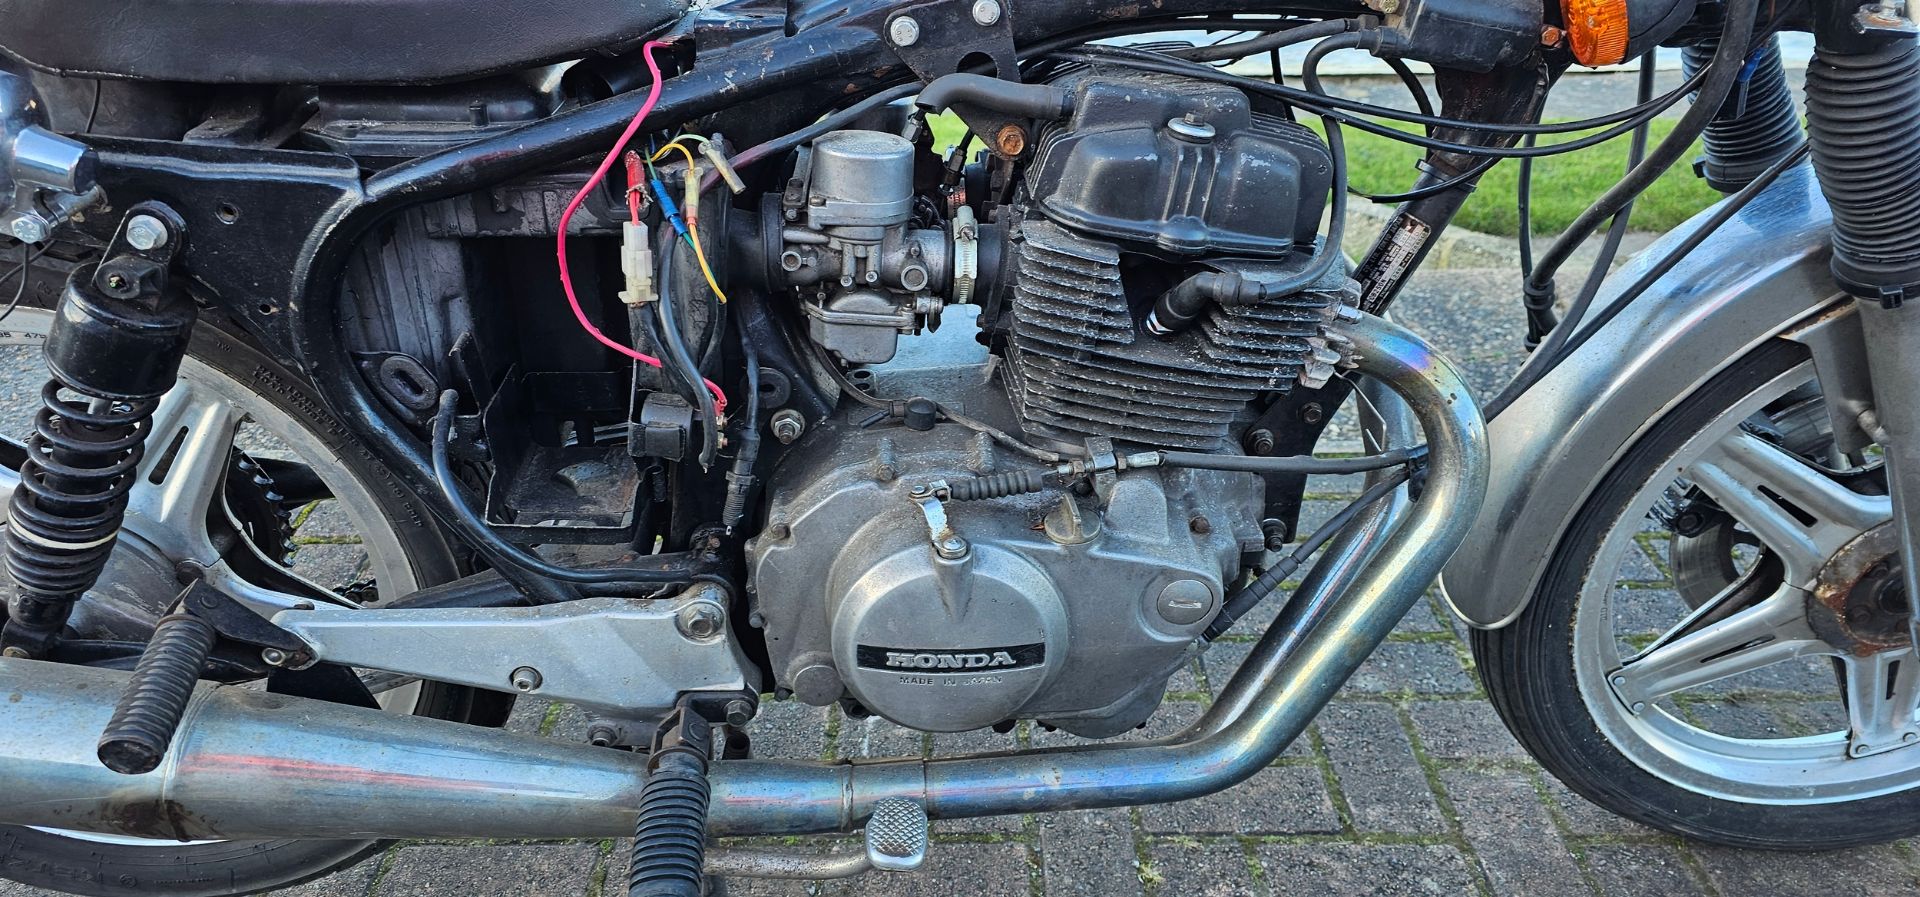 1981 Honda CB250N Super Dream, 248cc. PLEASE NOTE THIS IS A CAT C MOTORCYCLE. Registration number - Image 6 of 13